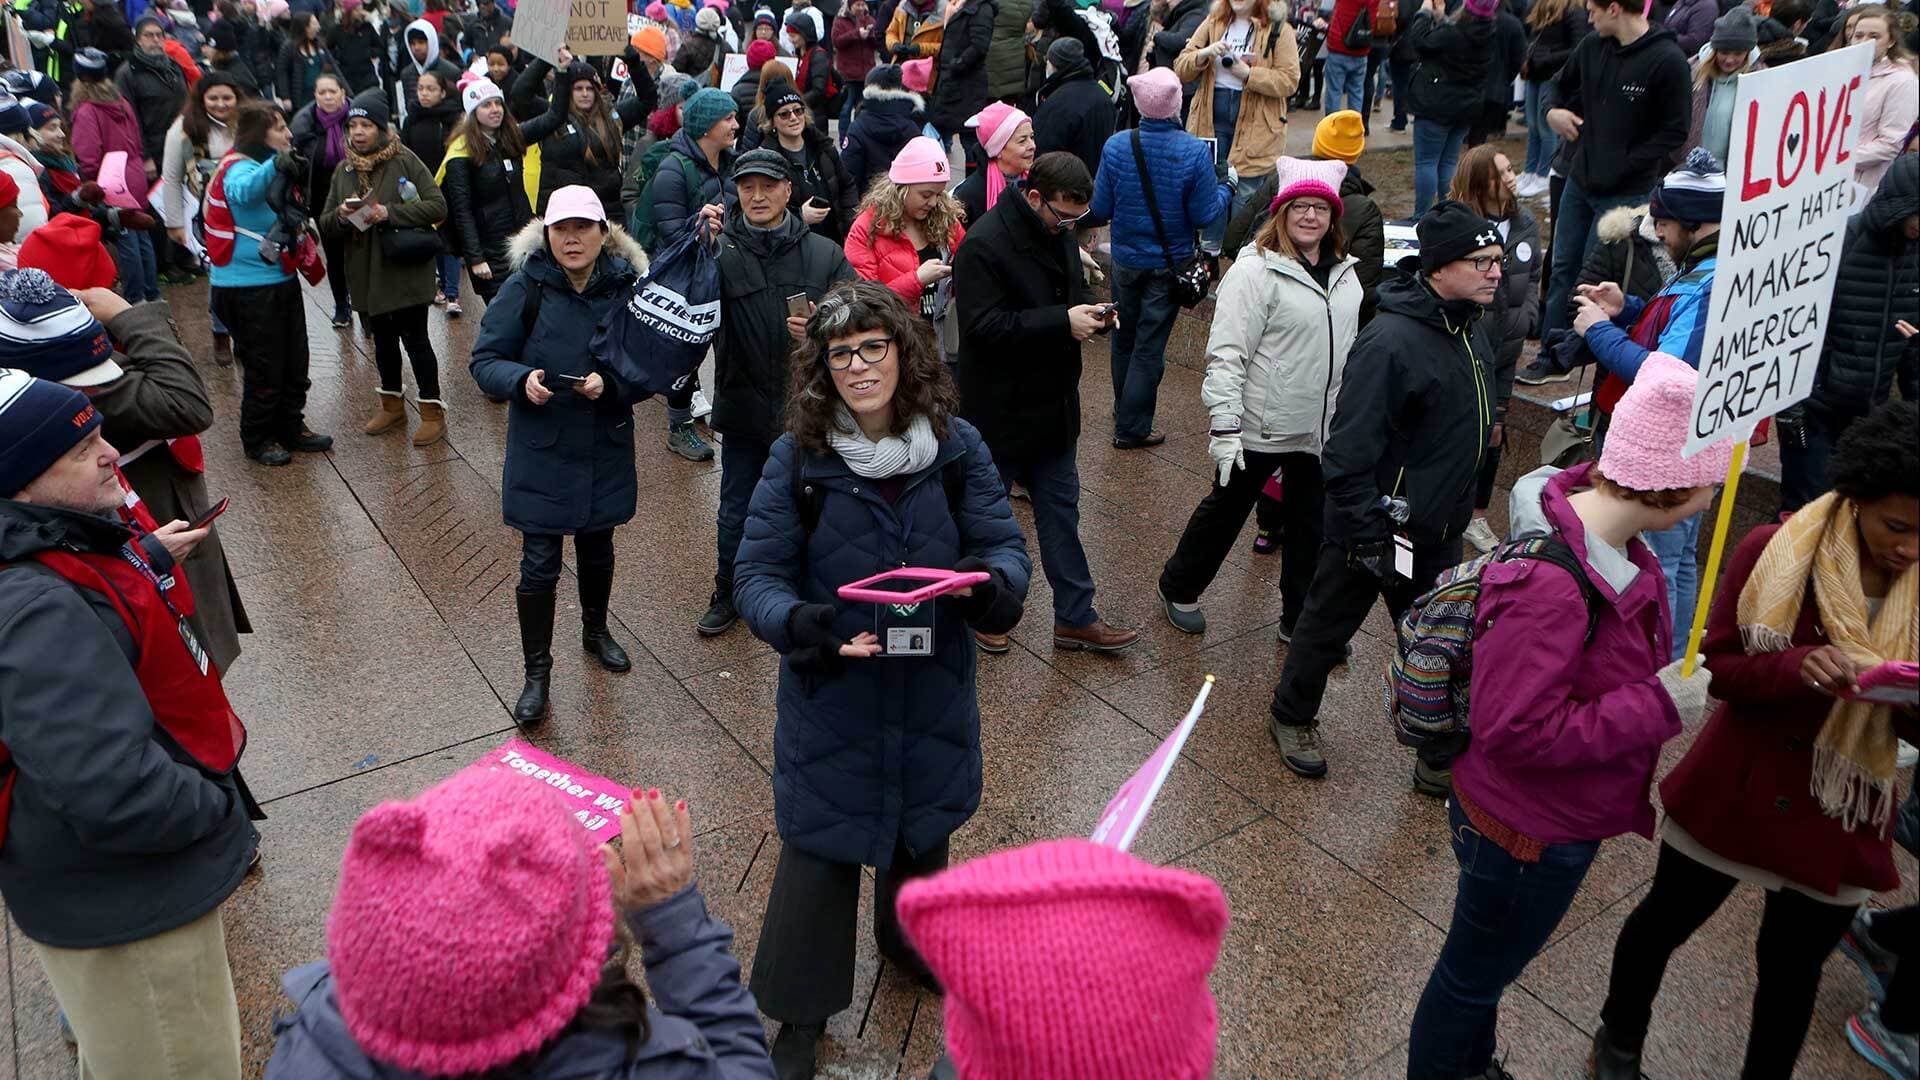 Dana Fisher in a crowd at a previous Women's March